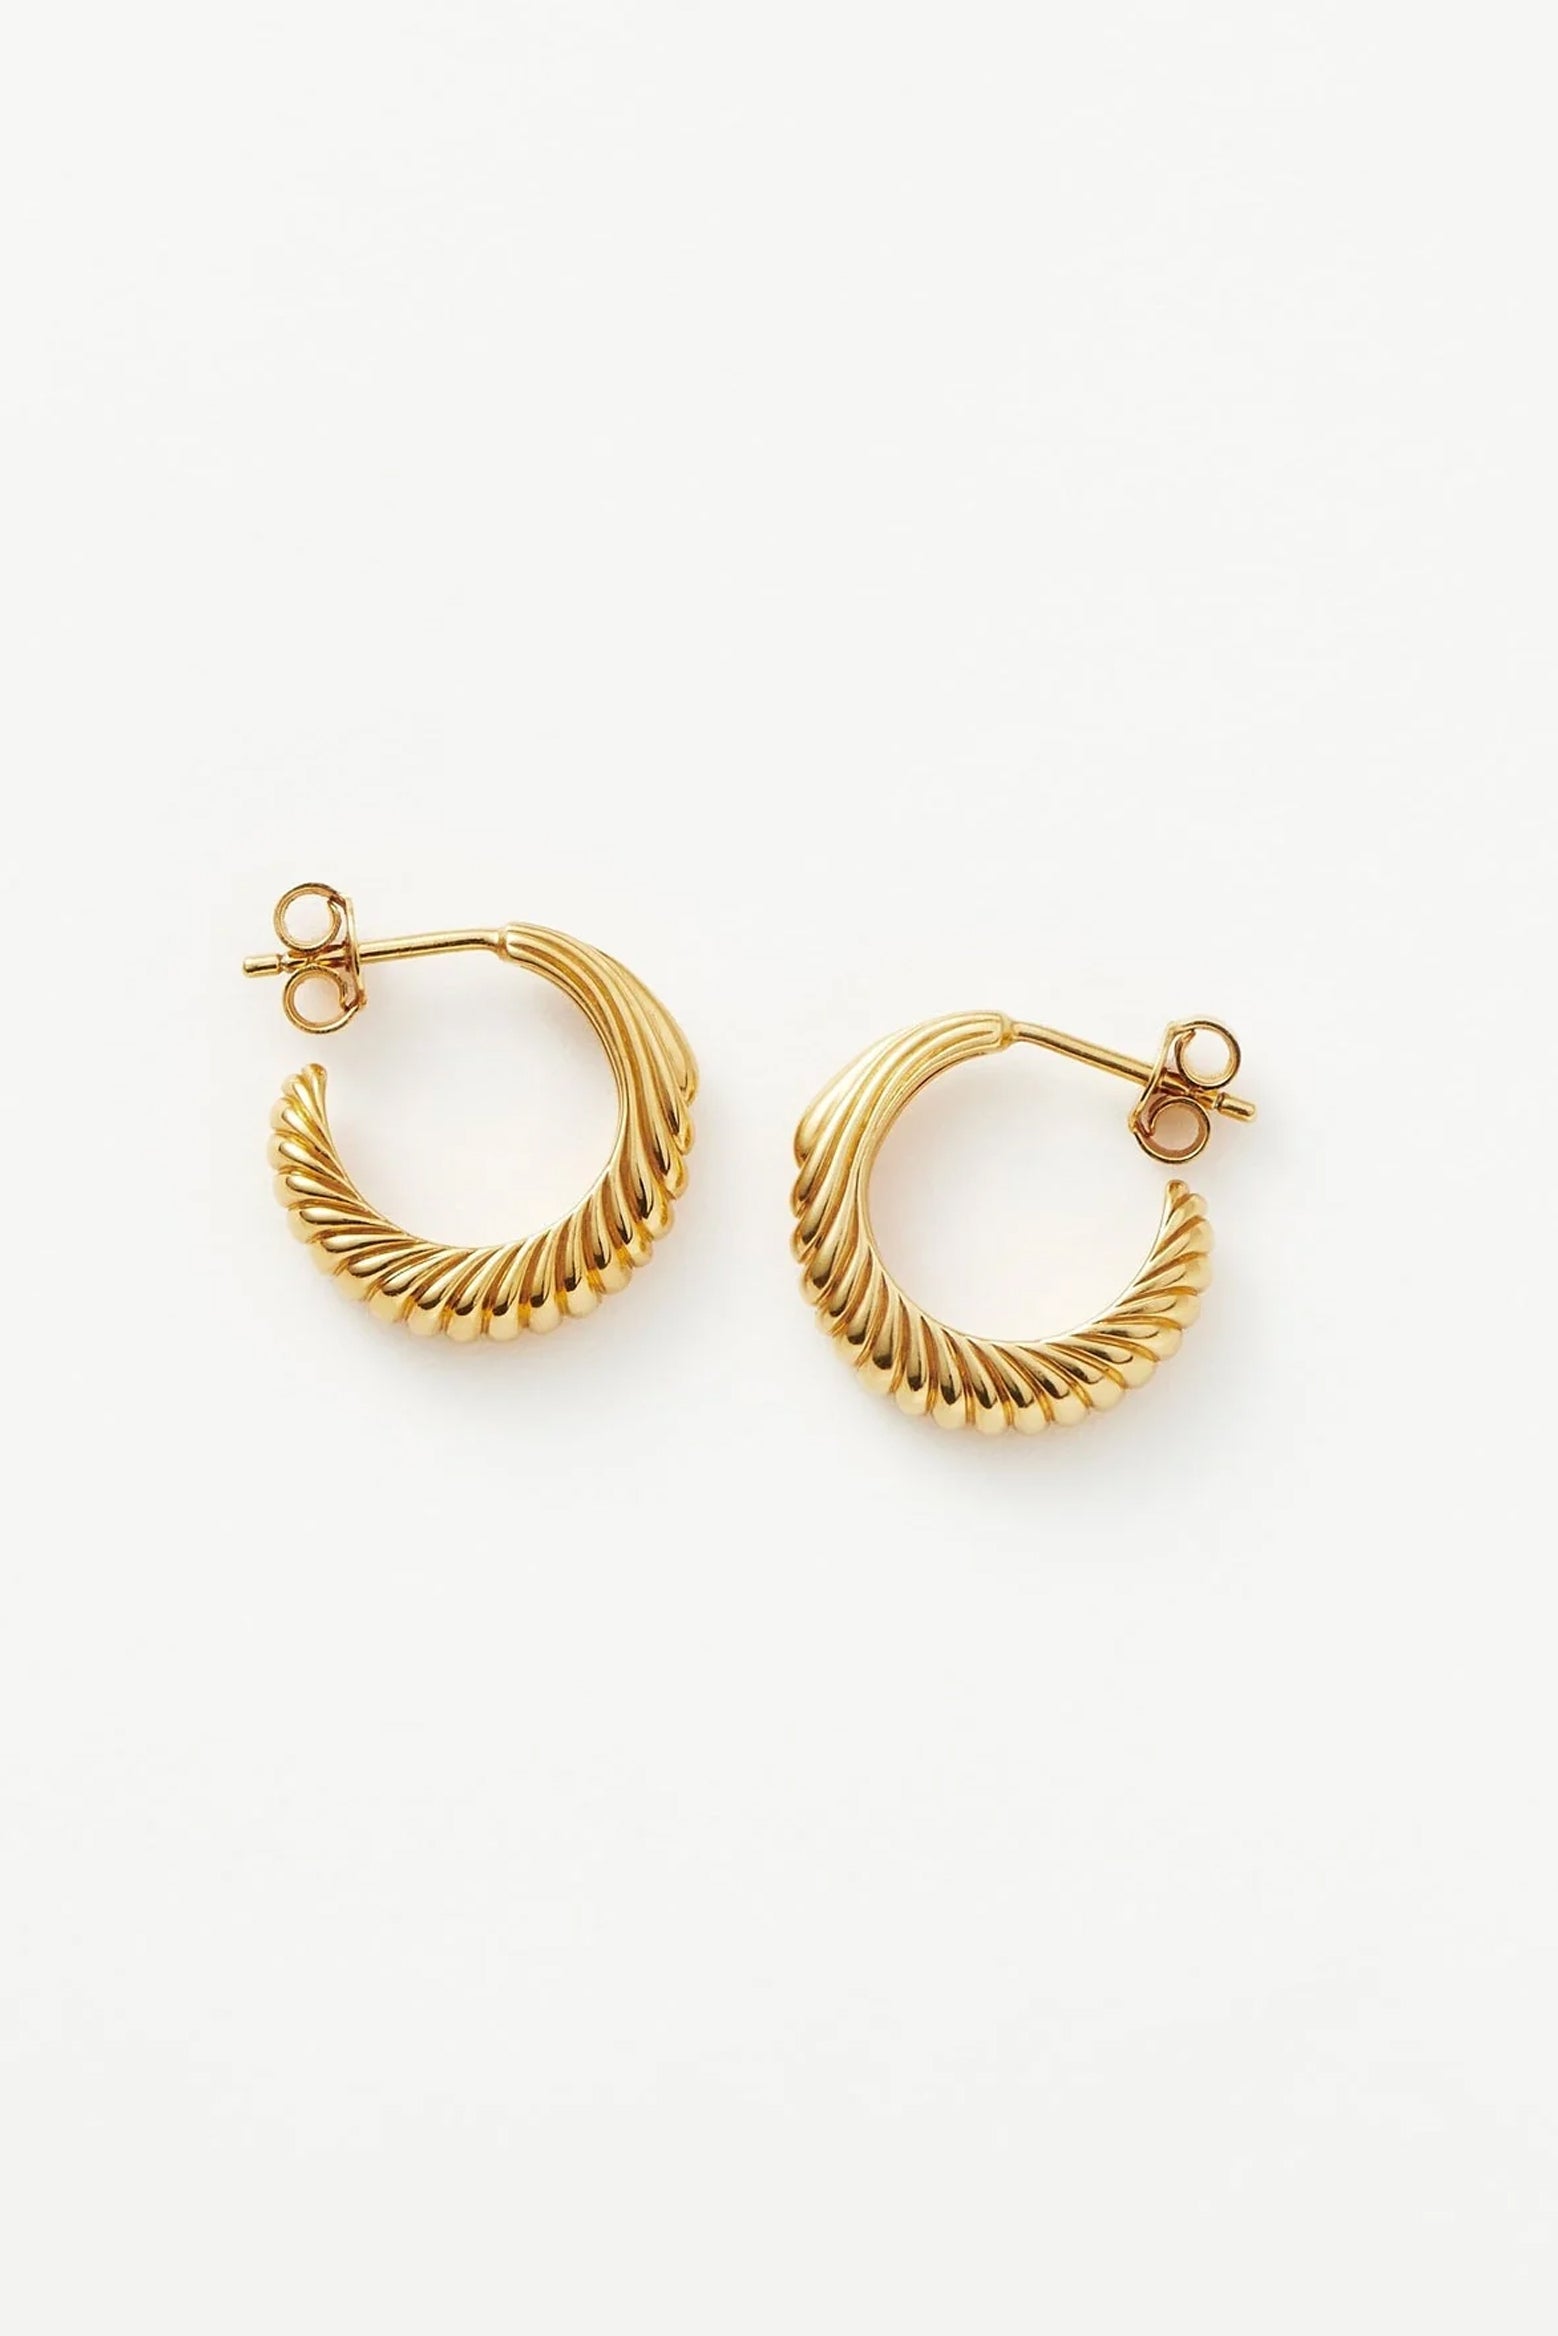 Missoma Small Gold Hoops available at The New Trend Australia